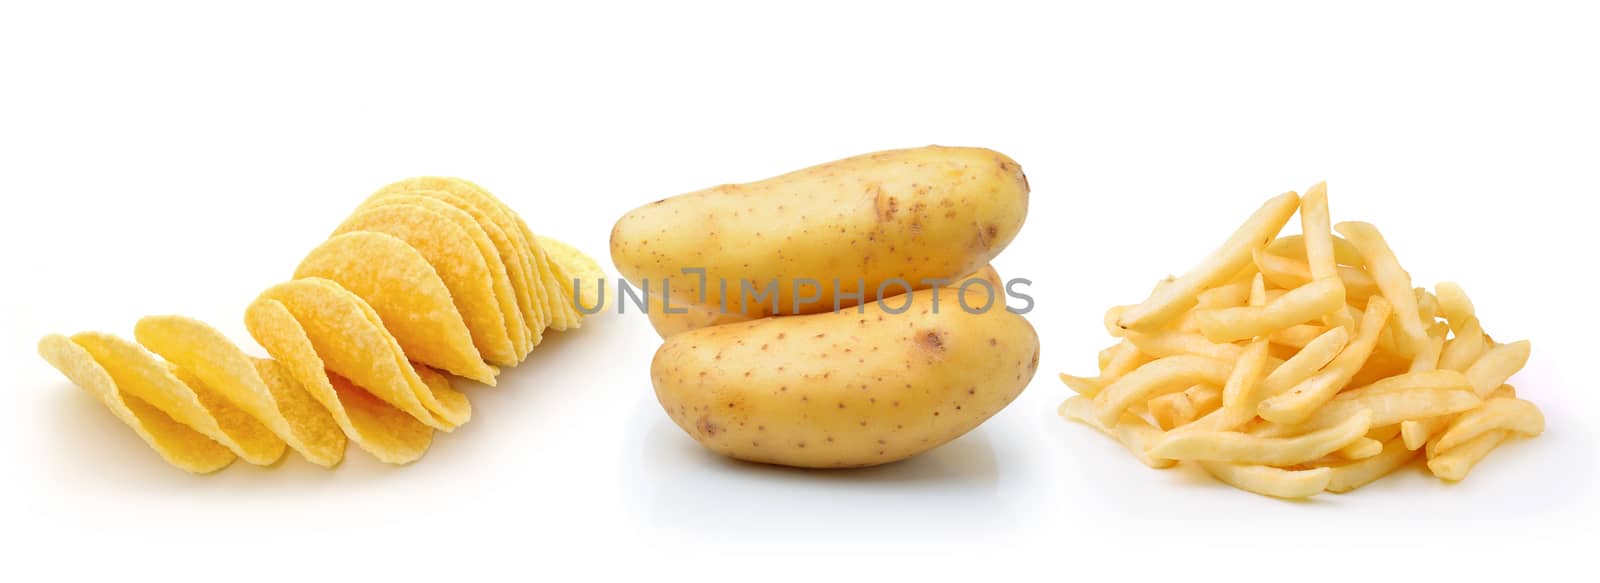 Potato chips, french fries and potato isolated on white background 